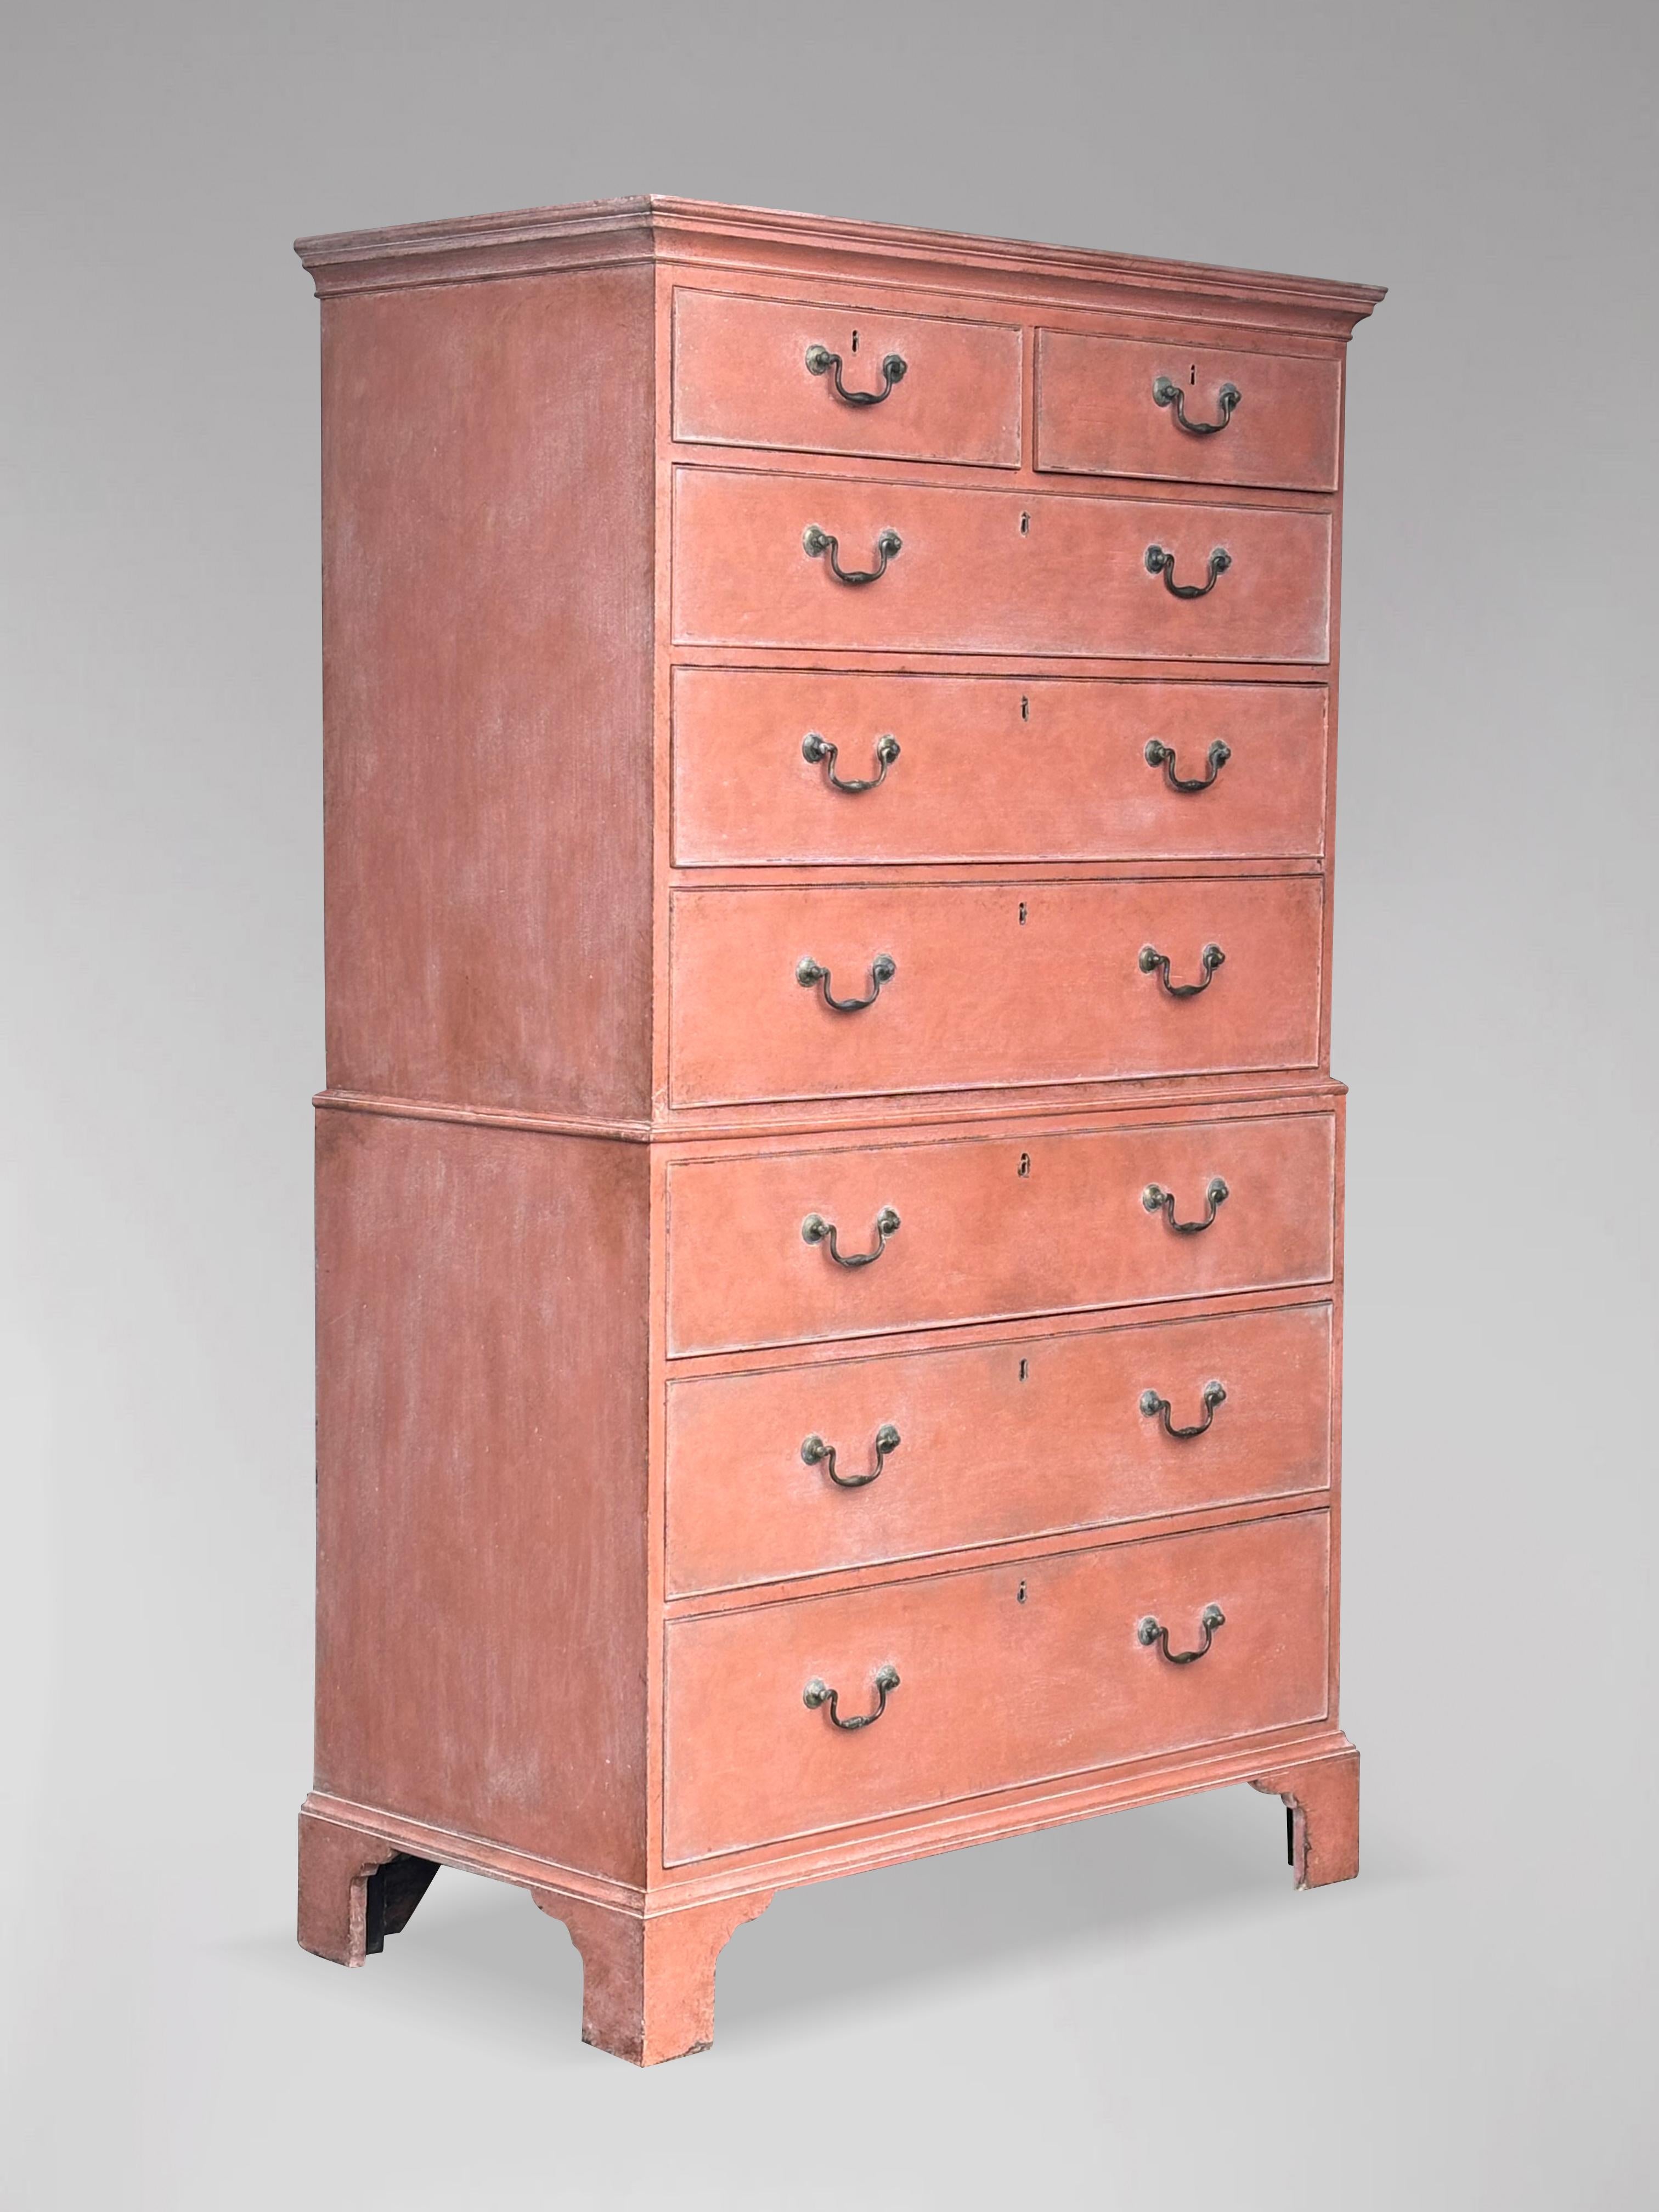 A late 18th century, George III period painted mahogany chest on chest of modest proportions, having moulded cornice above 2 short and 6 long, cockbeaded graduated drawers all lined in oak and fitted with original brass swan neck handles and